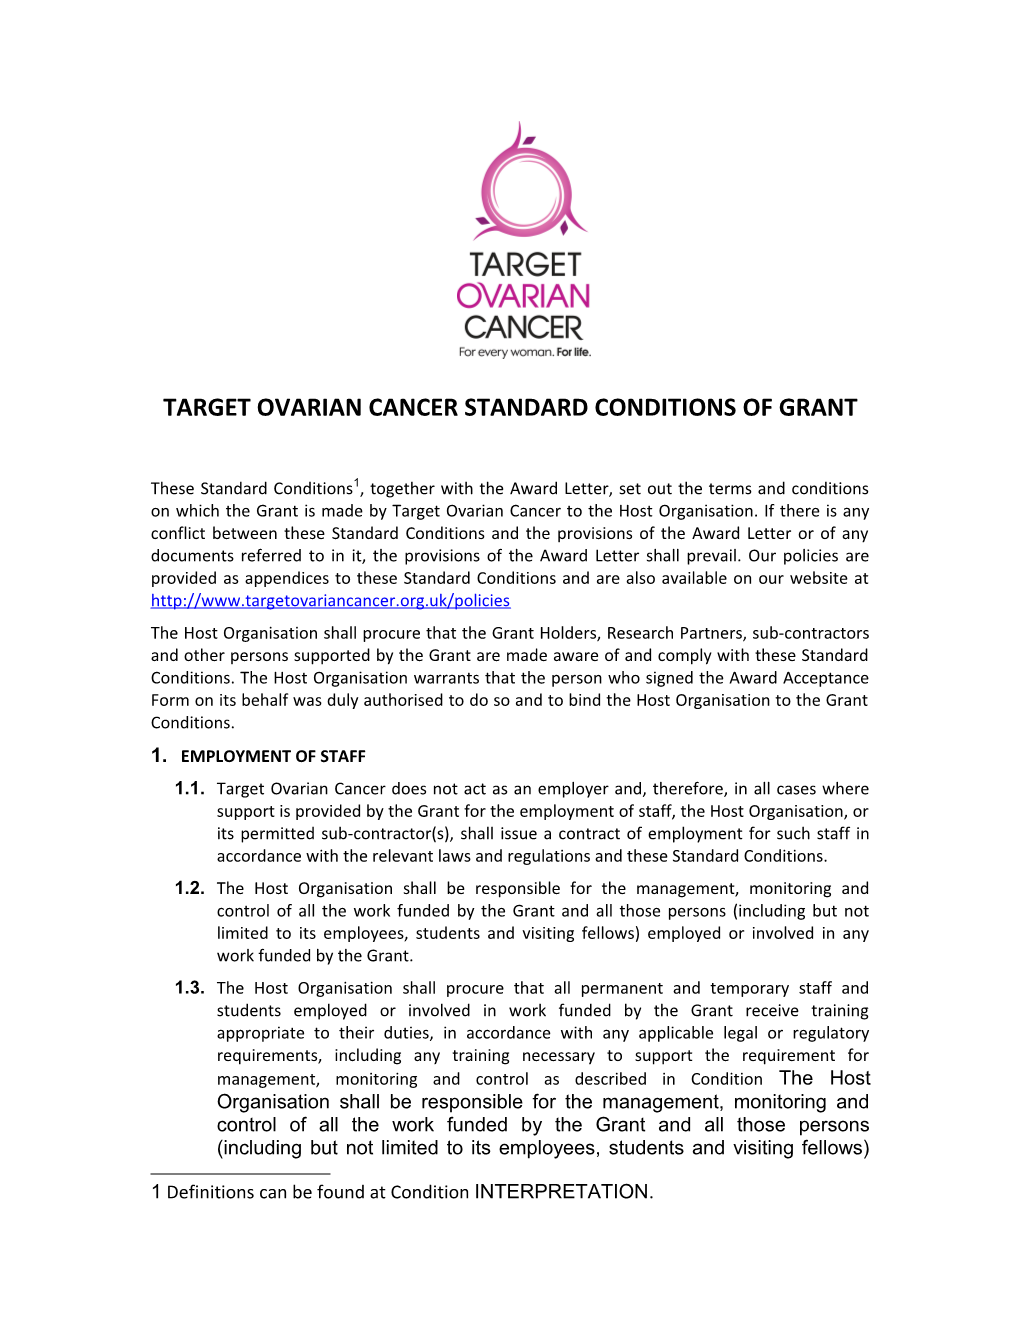 Target Ovarian Cancer Standard Conditions of Grant